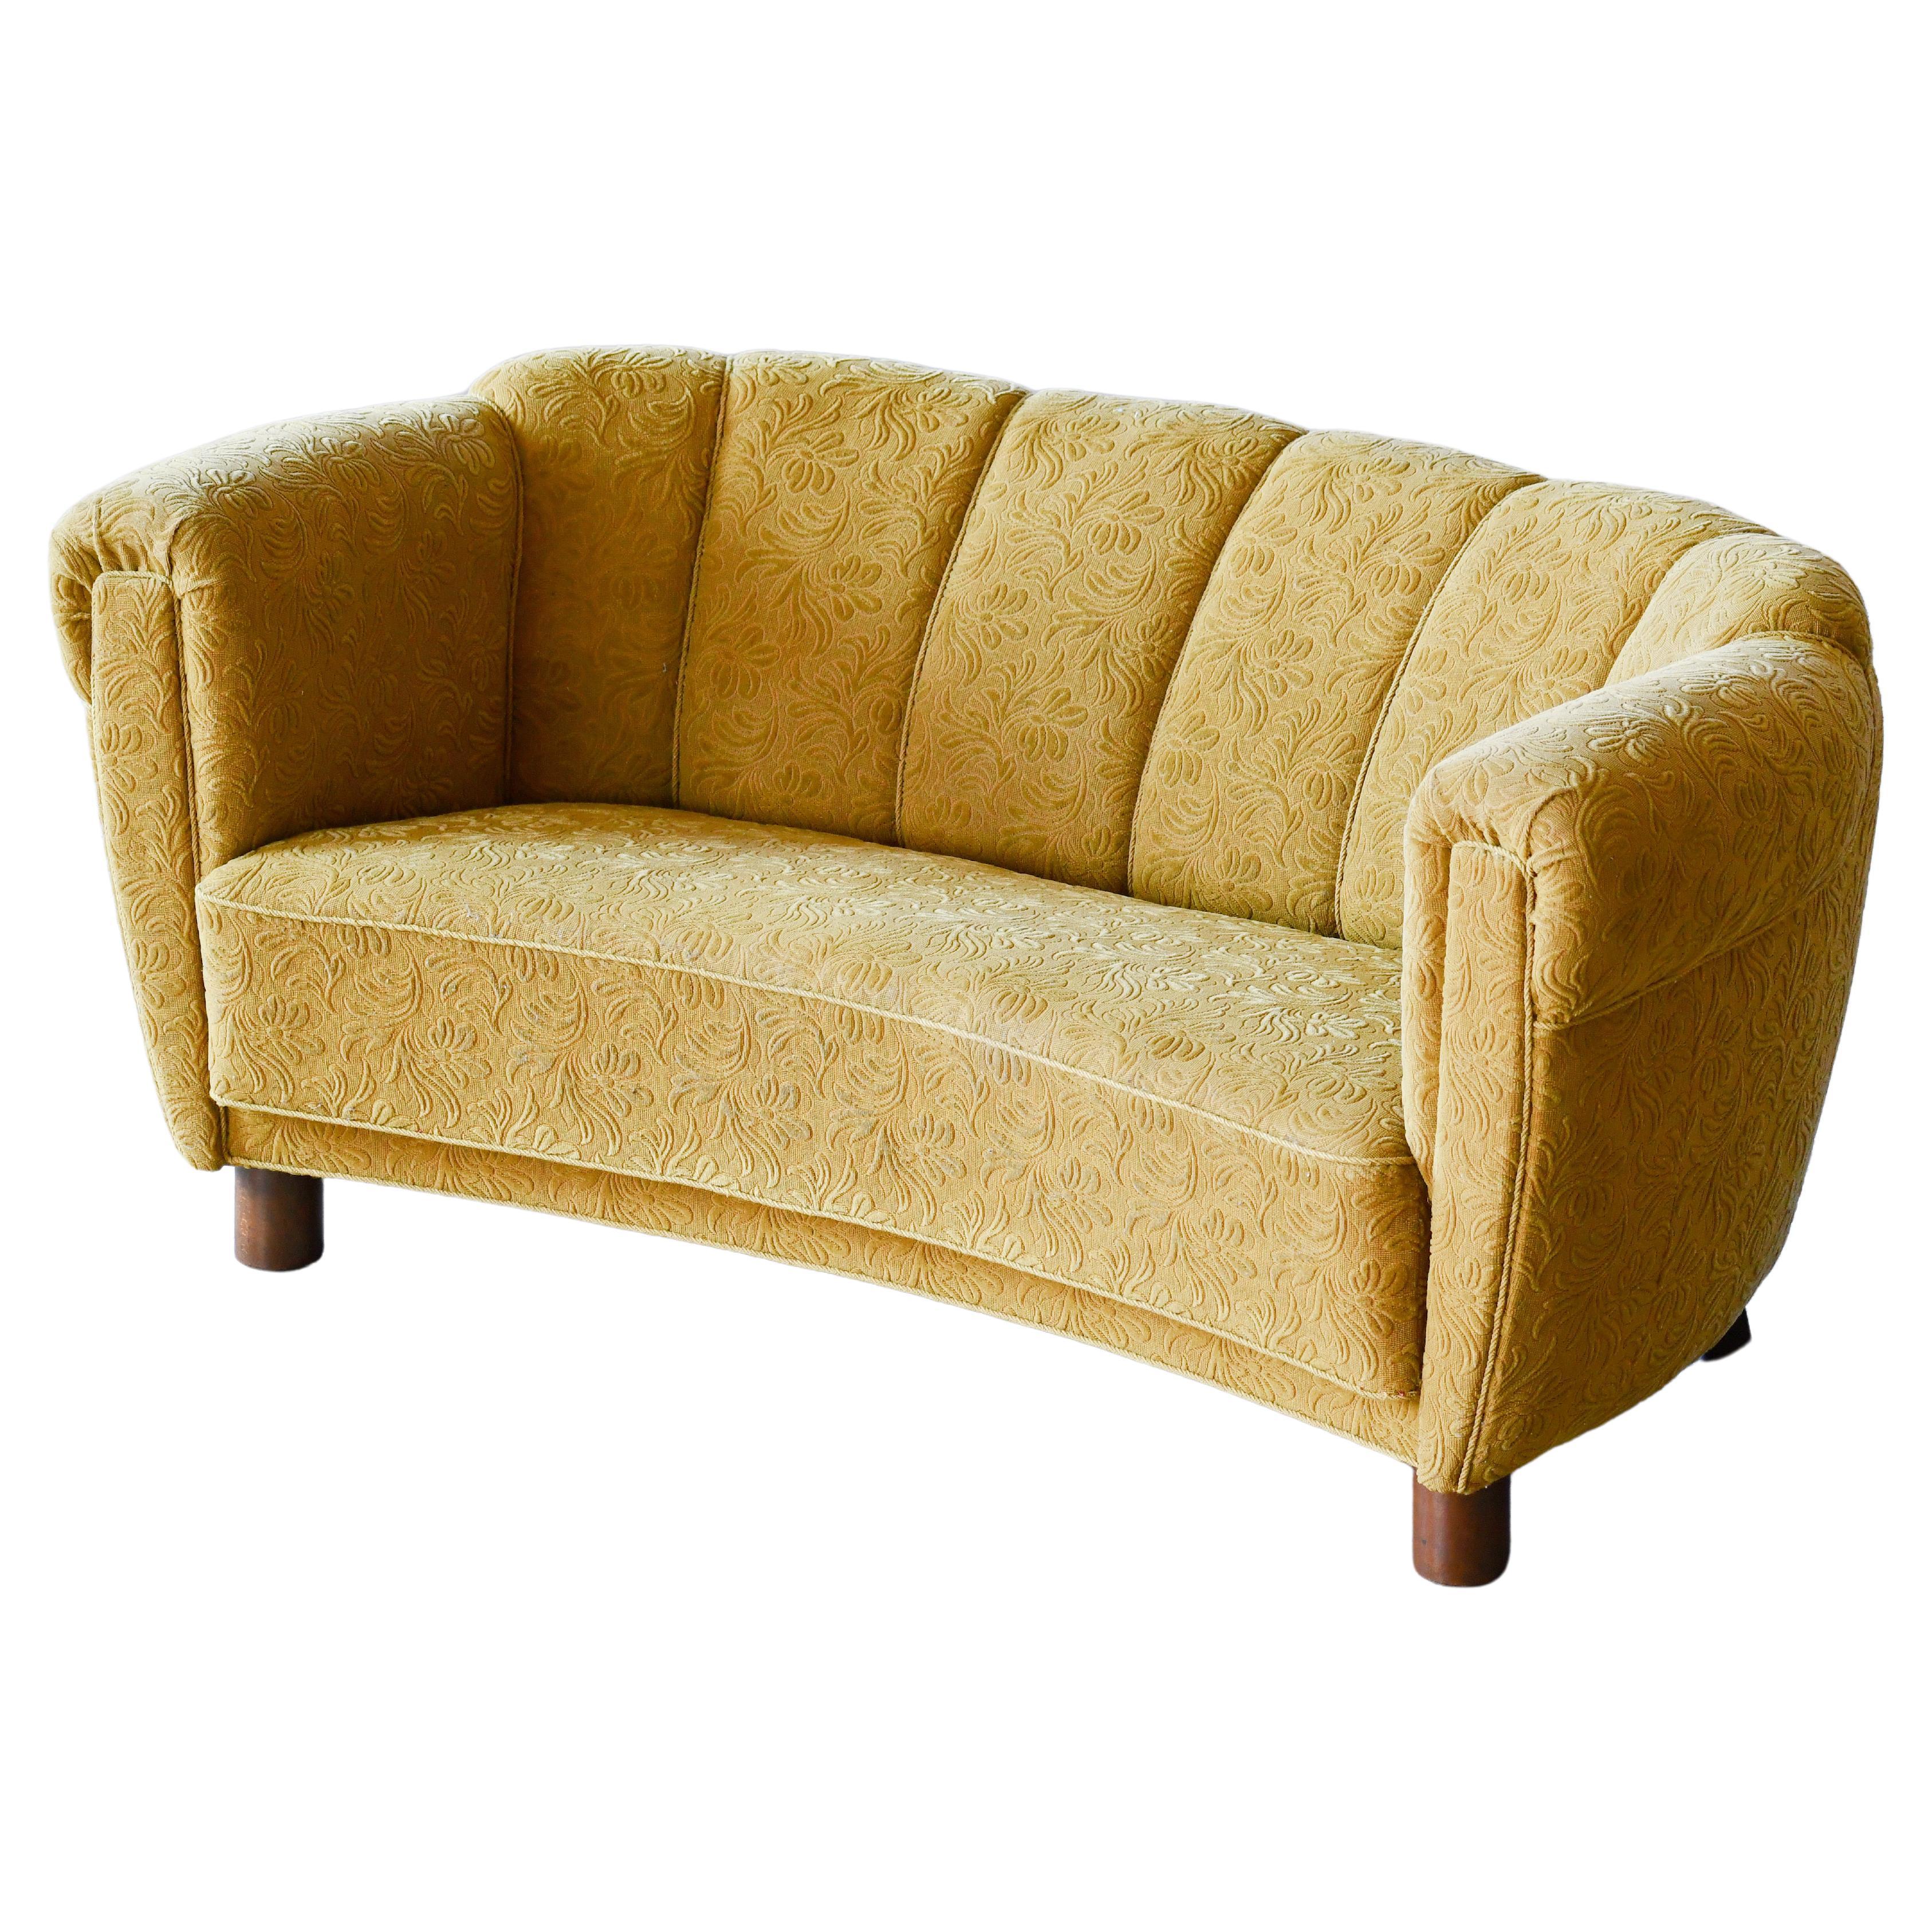 Danish Art Deco Curved Sofa or Loveseat 1930's For Sale